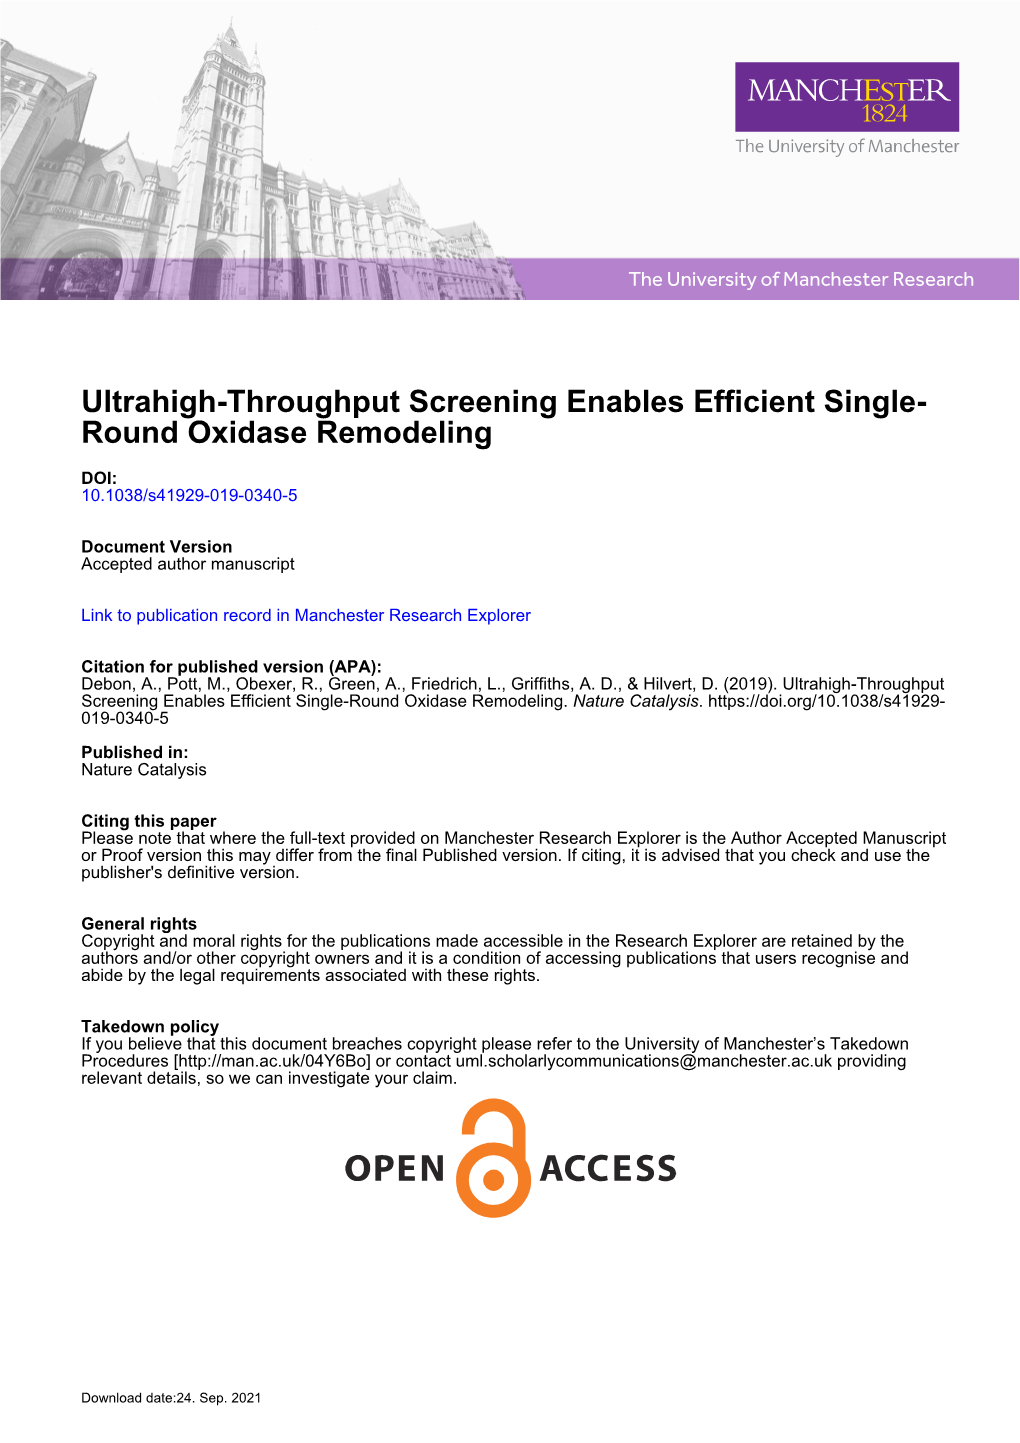 Ultrahigh-Throughput Screening Enables Efficient Single- Round Oxidase Remodeling